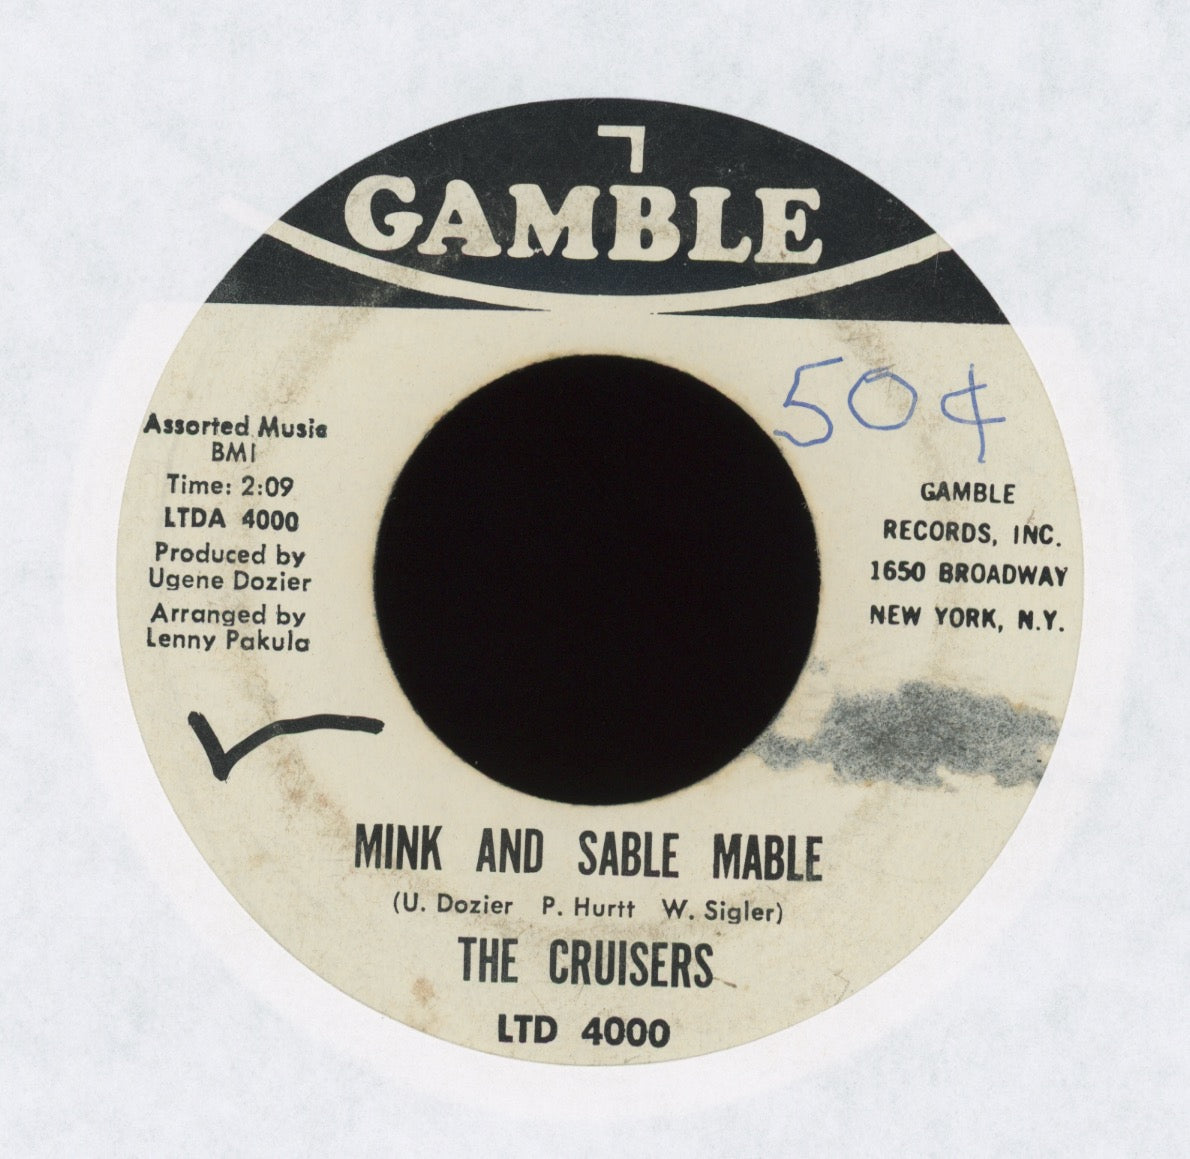 The Cruisers - Mink And Sable Mable on Gamble Promo